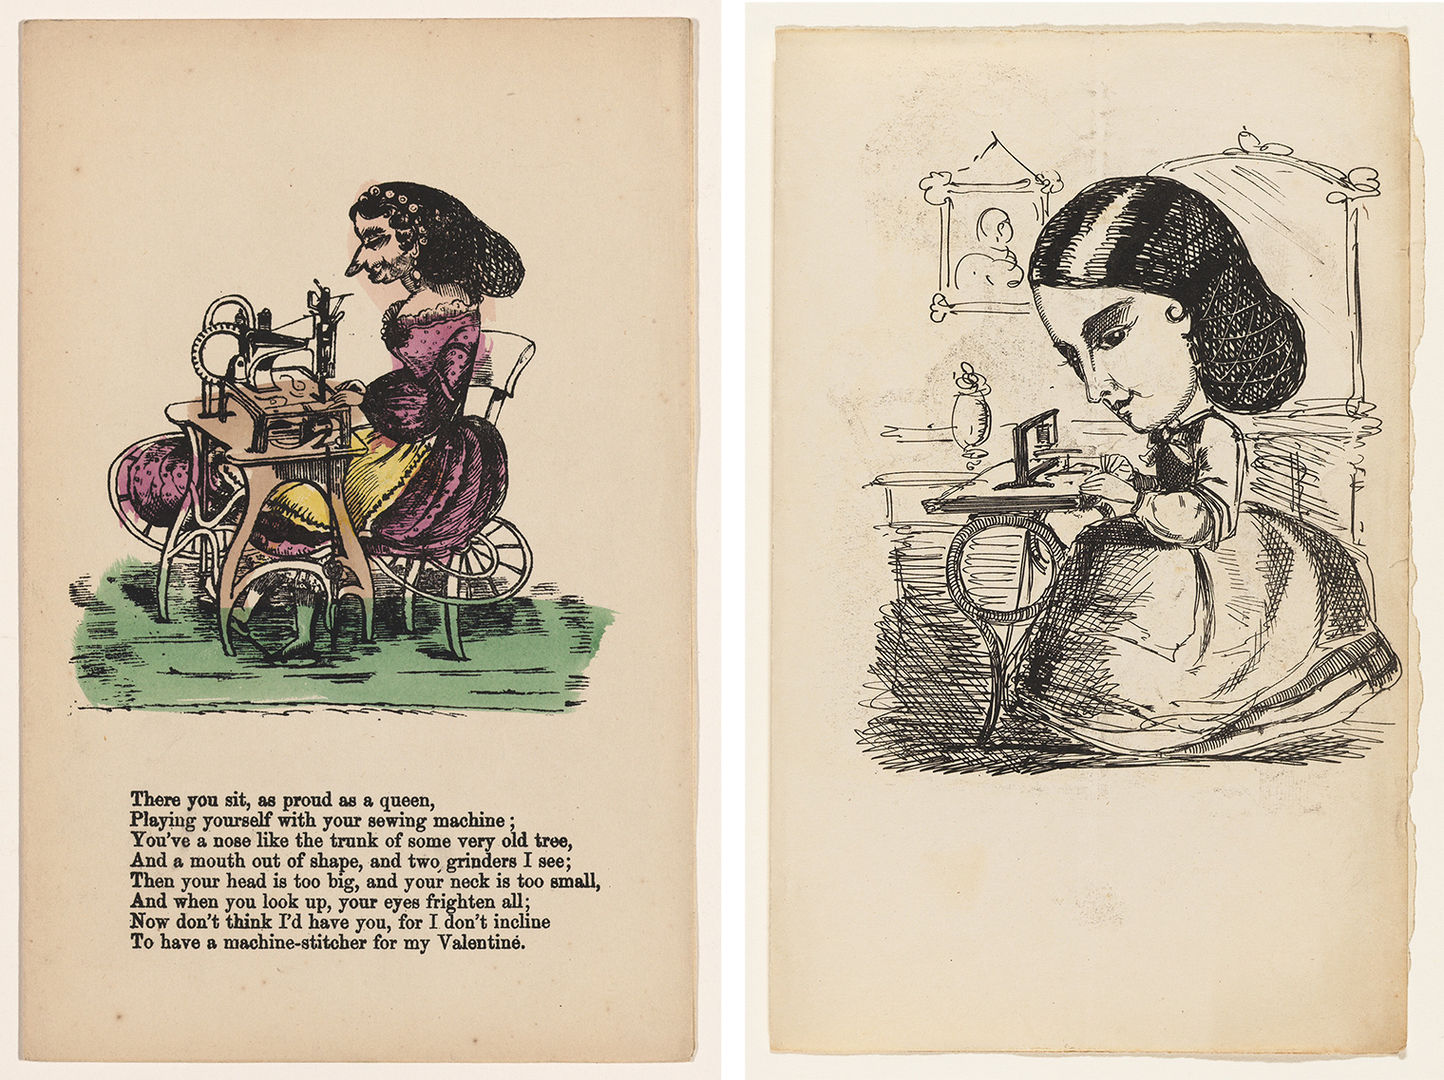 Two images of women seated at sewing machines. The image at left is colored, and includes a poem.